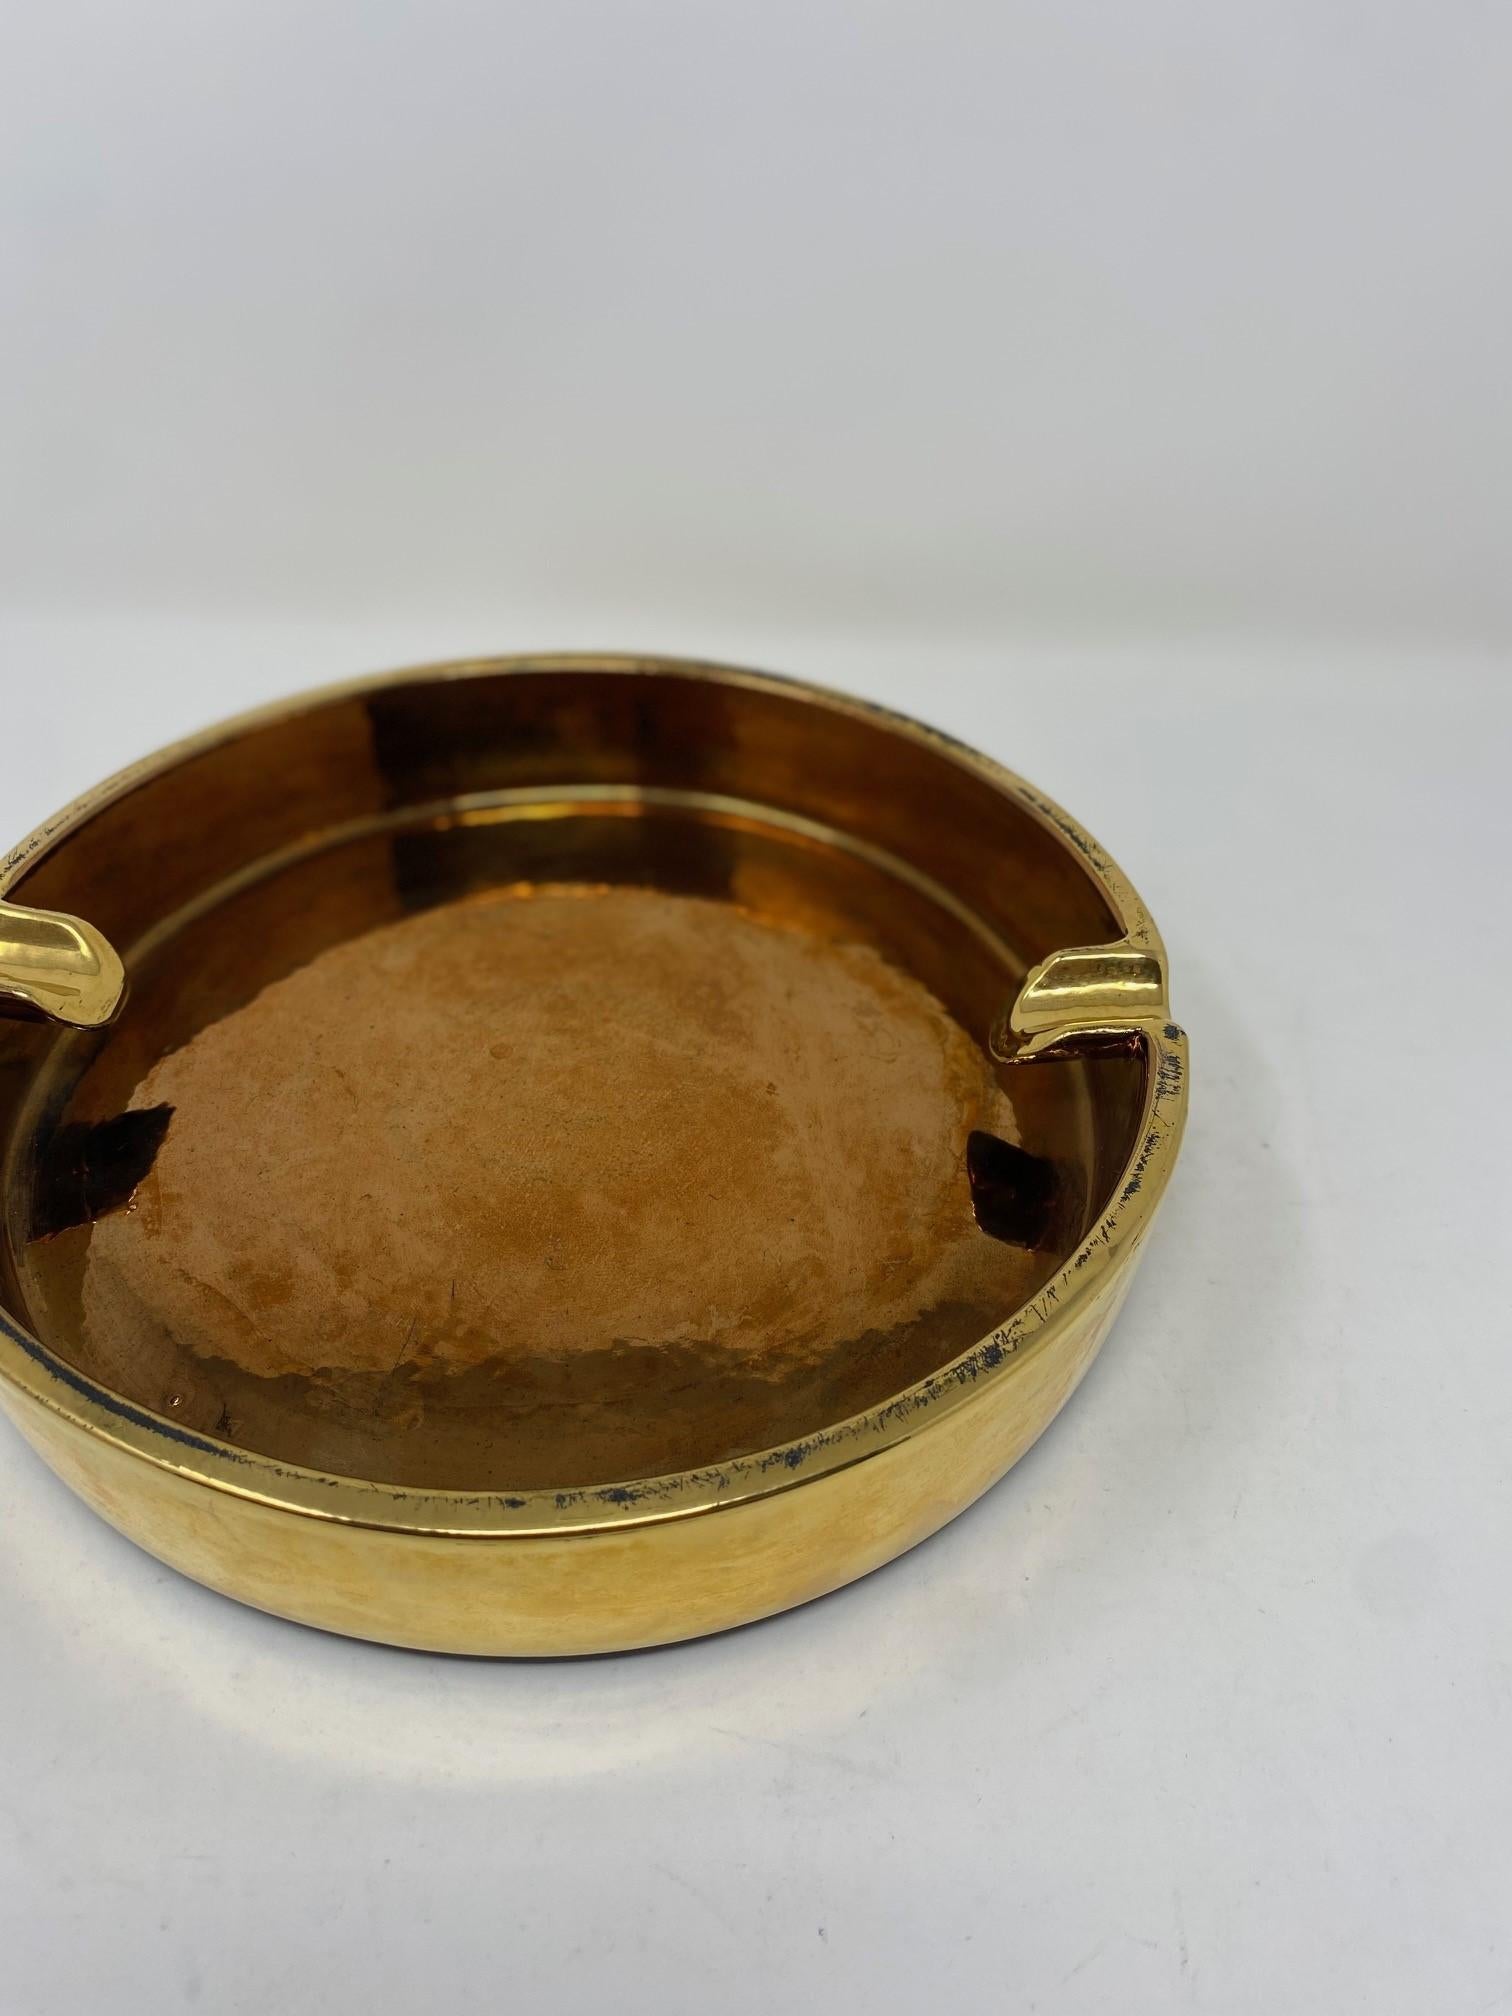 Hand-Crafted Bitossi Ceramic Ashtray Gold Berkeley House Signed Italy, 1960s For Sale